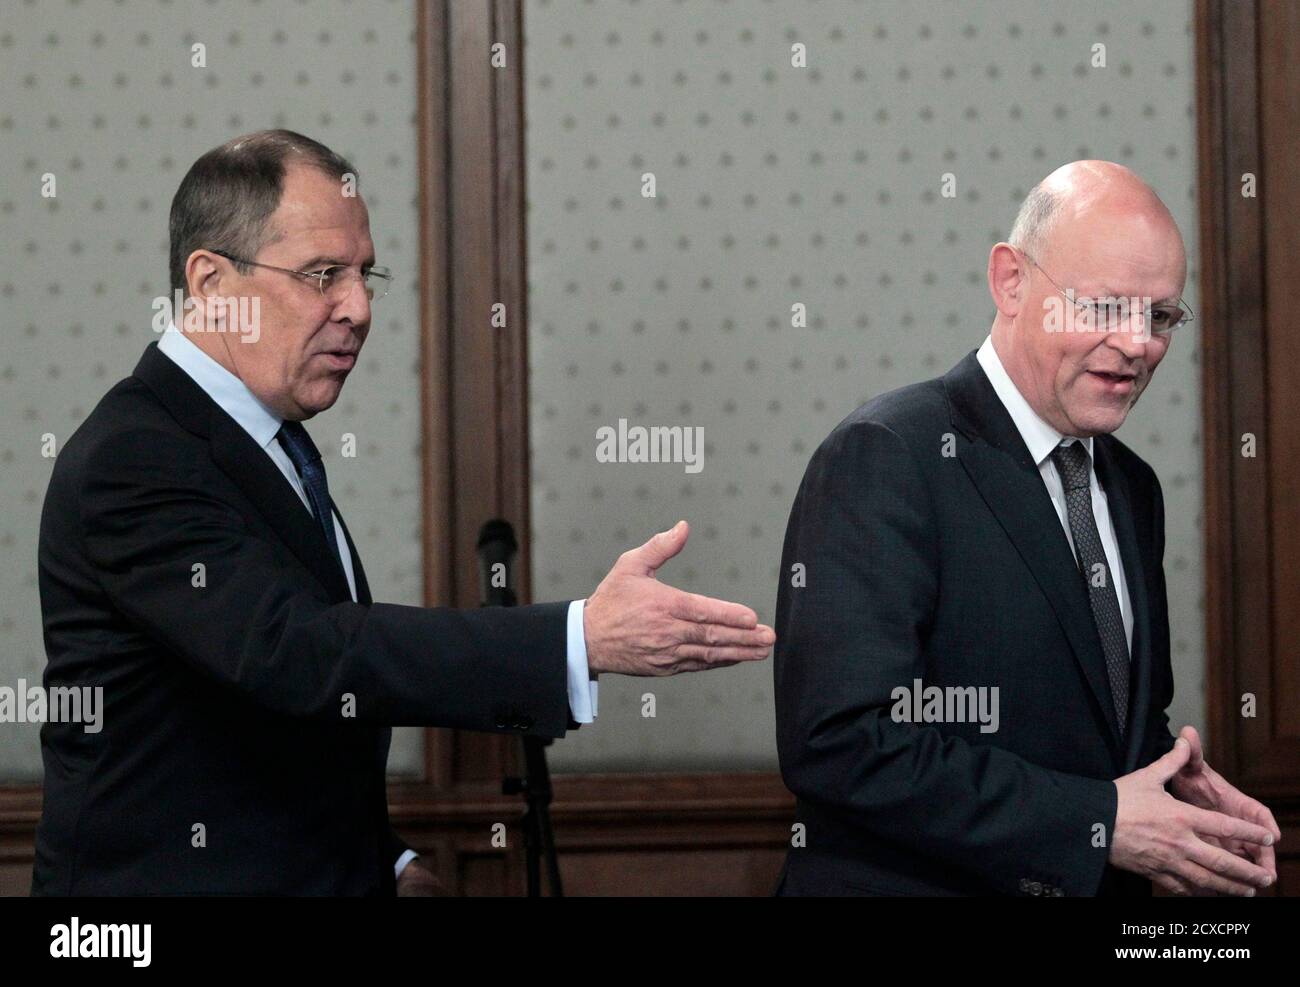 Russian Foreign Minister Sergei Lavrov (L) gestures towards his Dutch counterpart Uri Rosenthal during their meeting in Moscow March 14, 2011. Russia wants more information on the Arab League's call for a no-fly zone over Libya and will consider any proposal put before the U.N. Security Council, Lavrov said on Monday. REUTERS/Alexander Natruskin (RUSSIA - Tags: POLITICS) Stock Photo